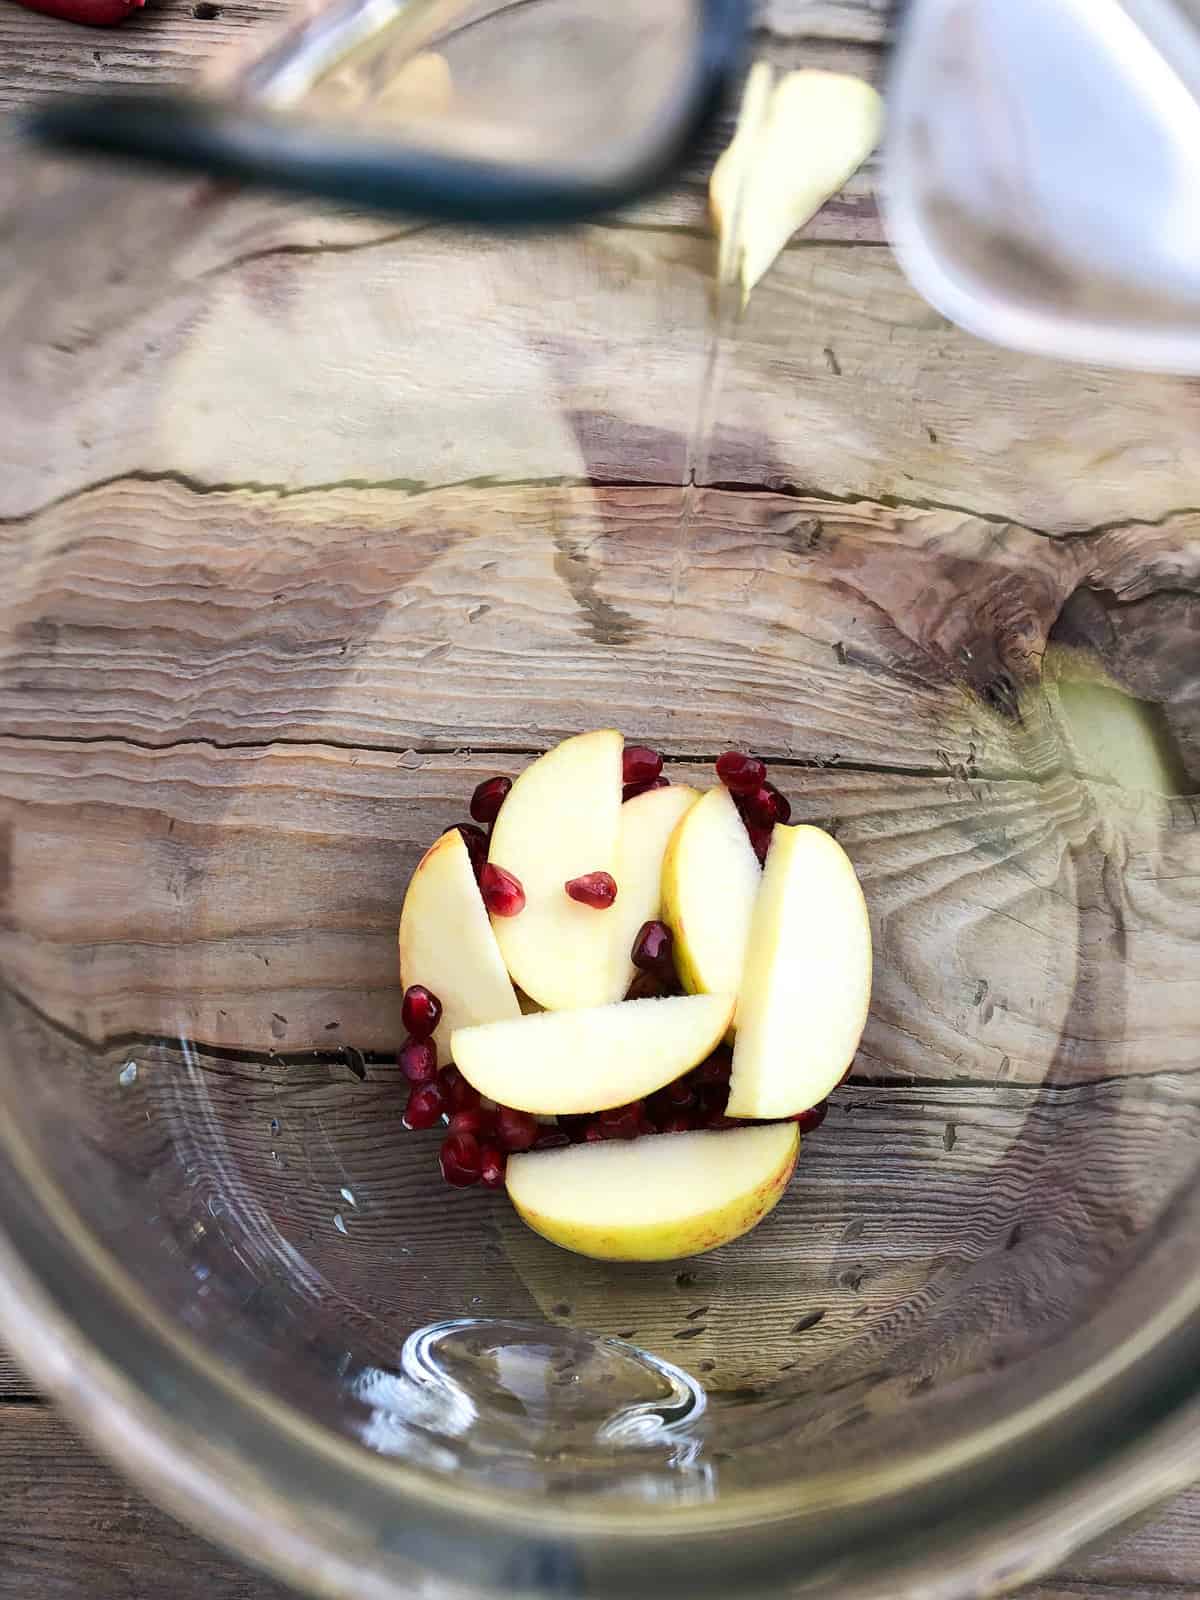 Simply add the sliced apples and pomegranate arils to the bottom of a glass pitcher.